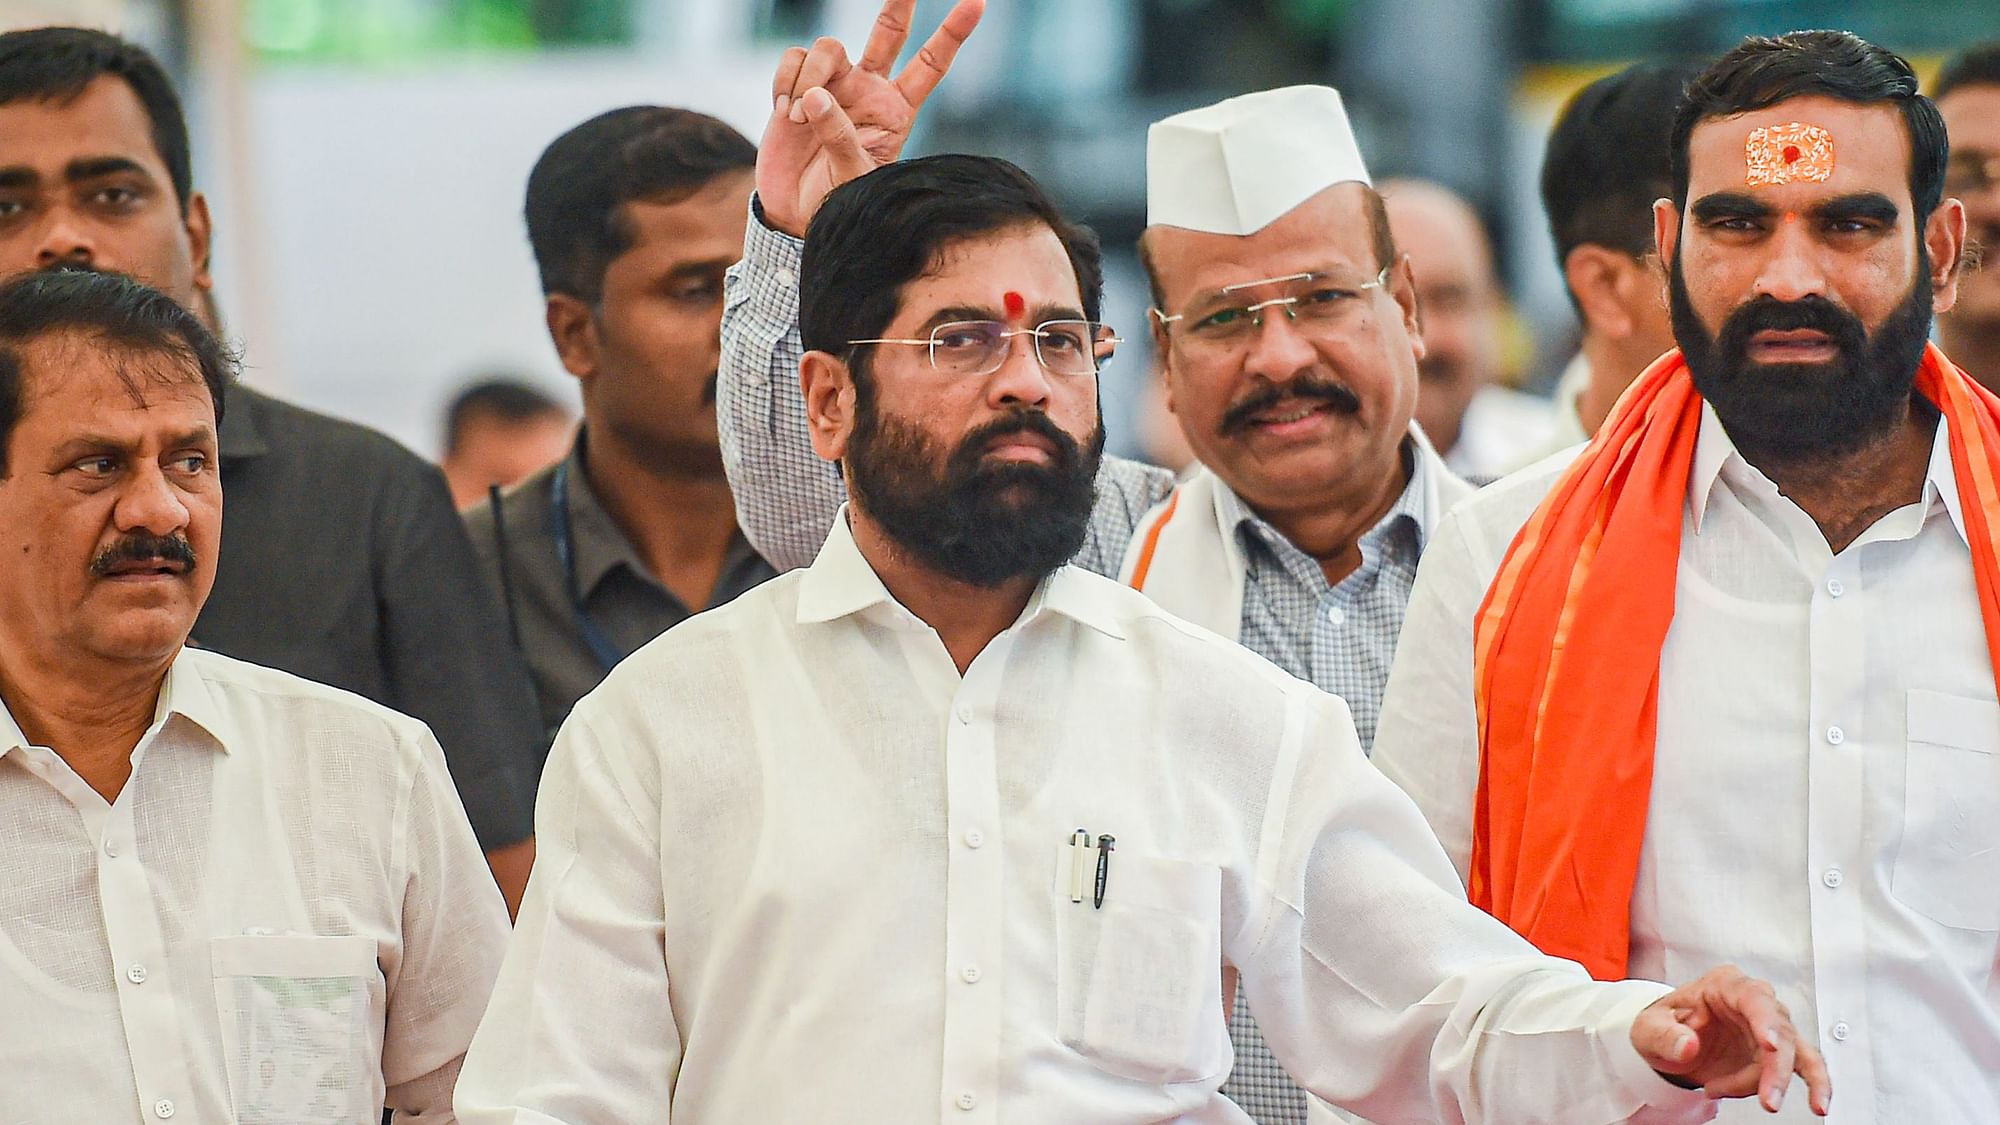 <div class="paragraphs"><p>Soon after emerging successful in the floor test held in the Maharashtra Assembly, Chief Minister Eknath Shinde on Monday, 4 July, said that he had been suppressed for a long time in the Shiv Sena and would now follow the path of Hindutva.</p></div>